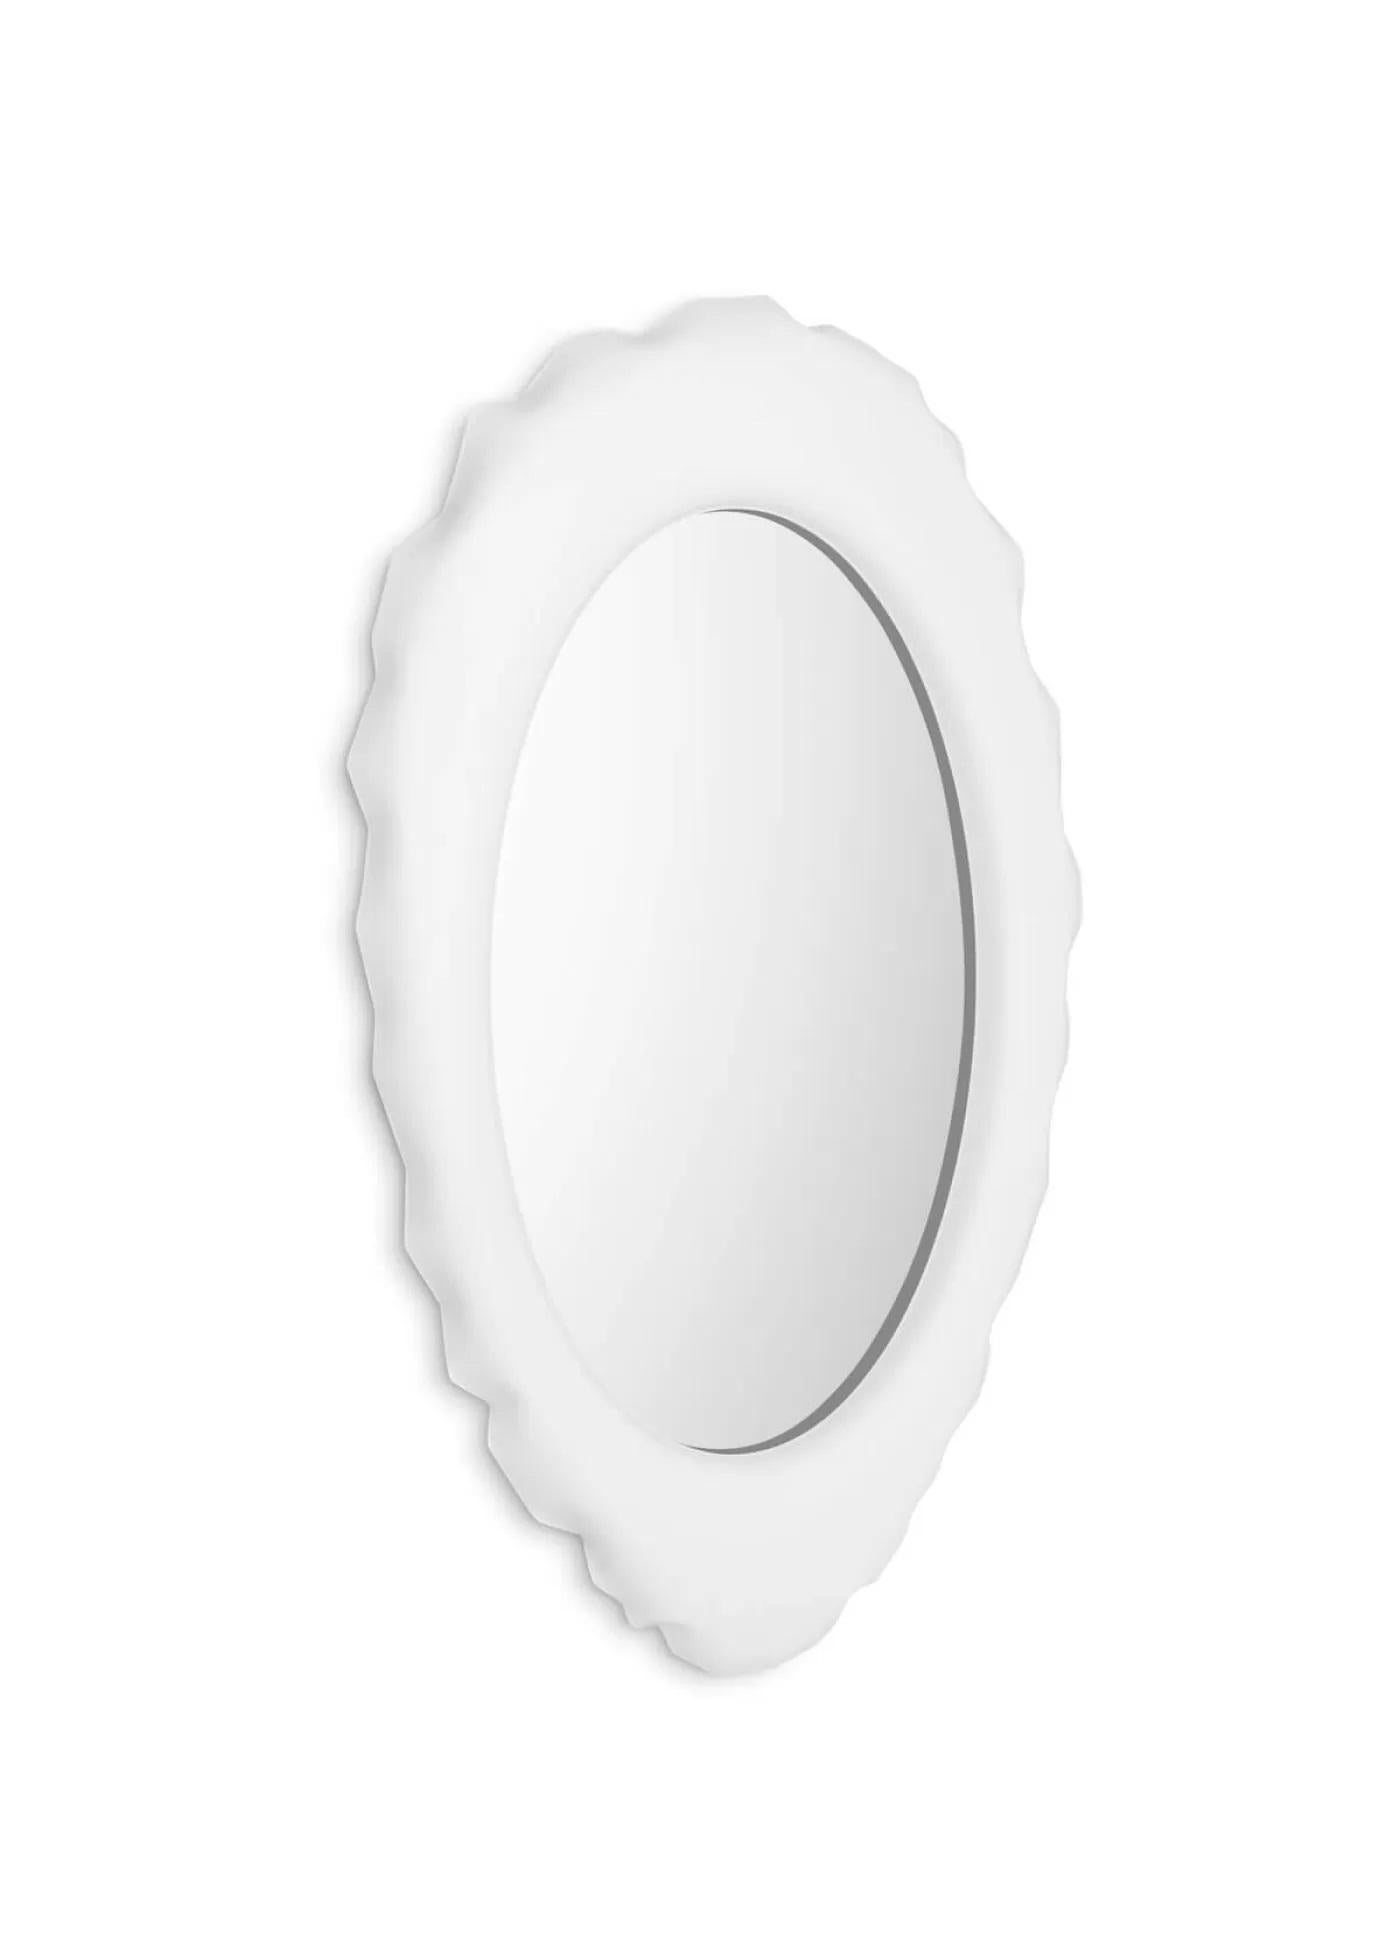 White silex wall mirror by Zieta
Dimensions: D 6 x W 75 x H 124 cm 
Material: Mirror, carbon steel.
Finish: Powder-coated in white matt.
Also available in colors: stainless steel, or powder-coated.


SILEX is an art form and a reference to the